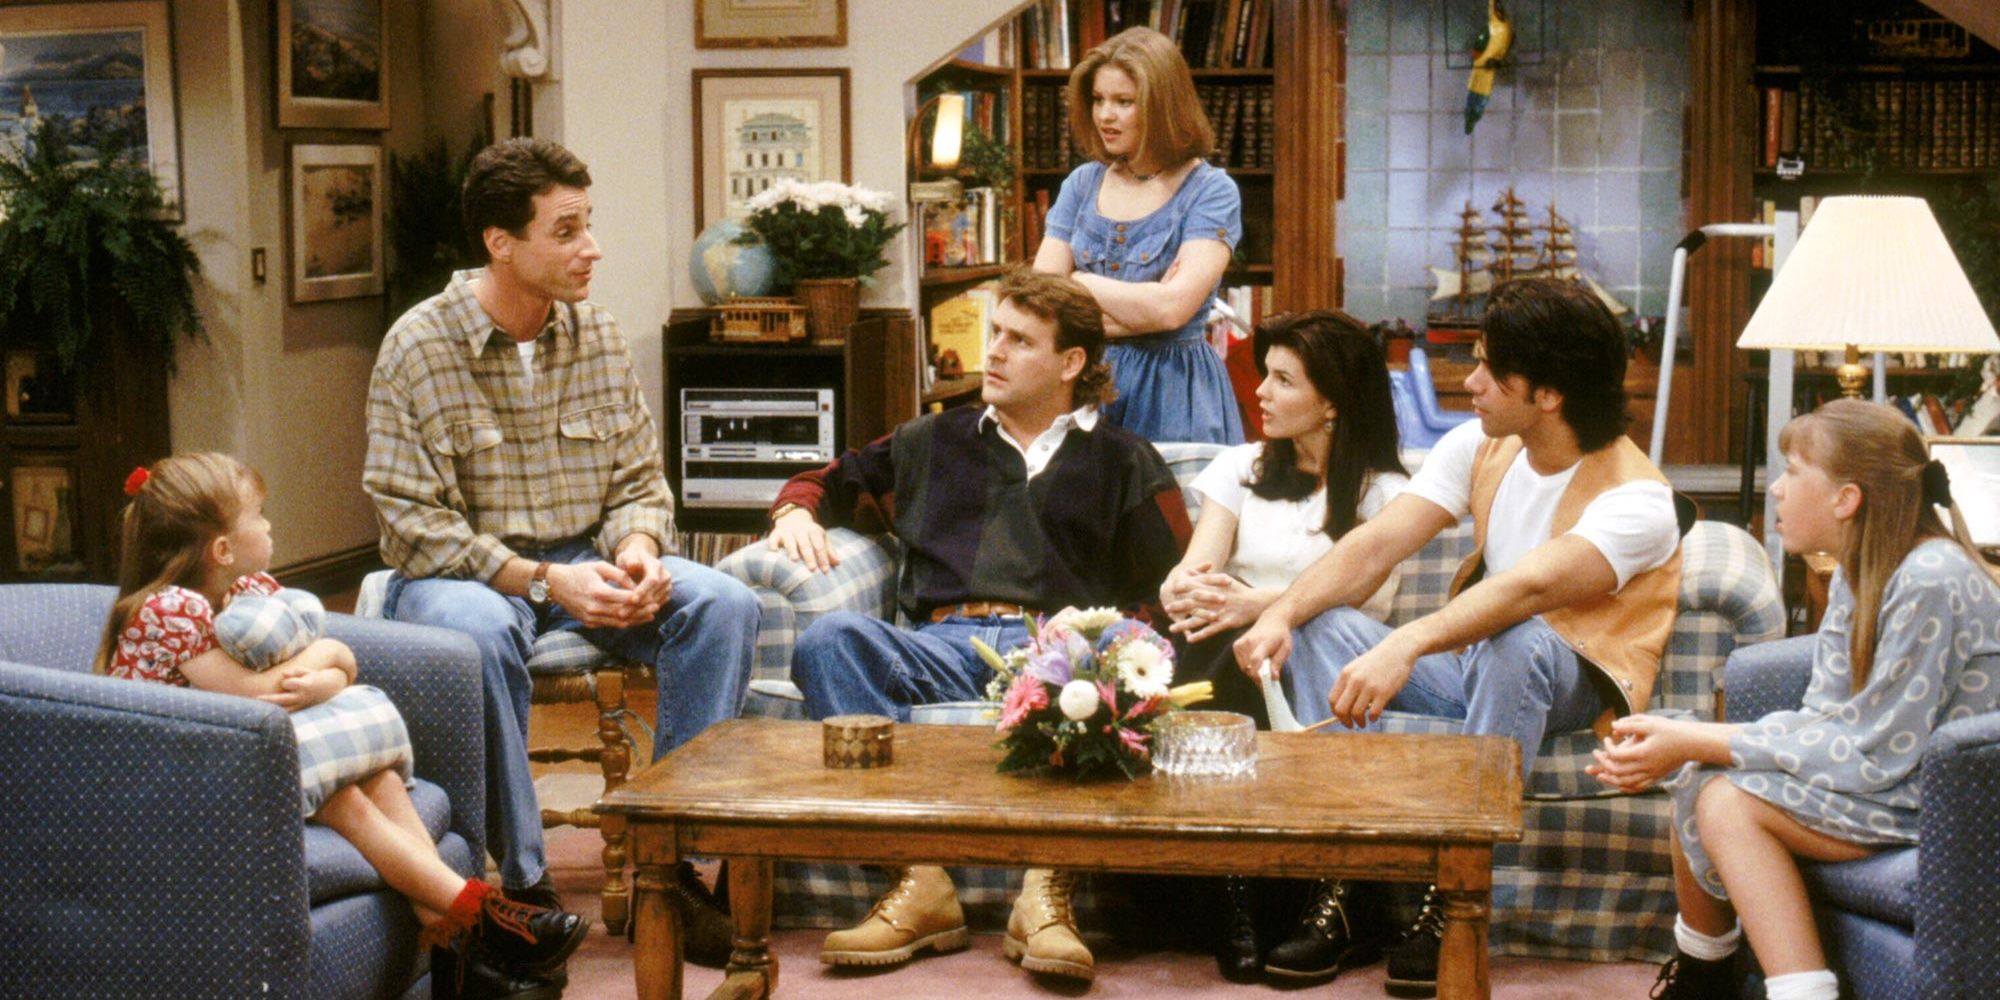 The cast of Full House all sitting together in the living room looking at Danny Tanner, played by Bob Saget, in shock 